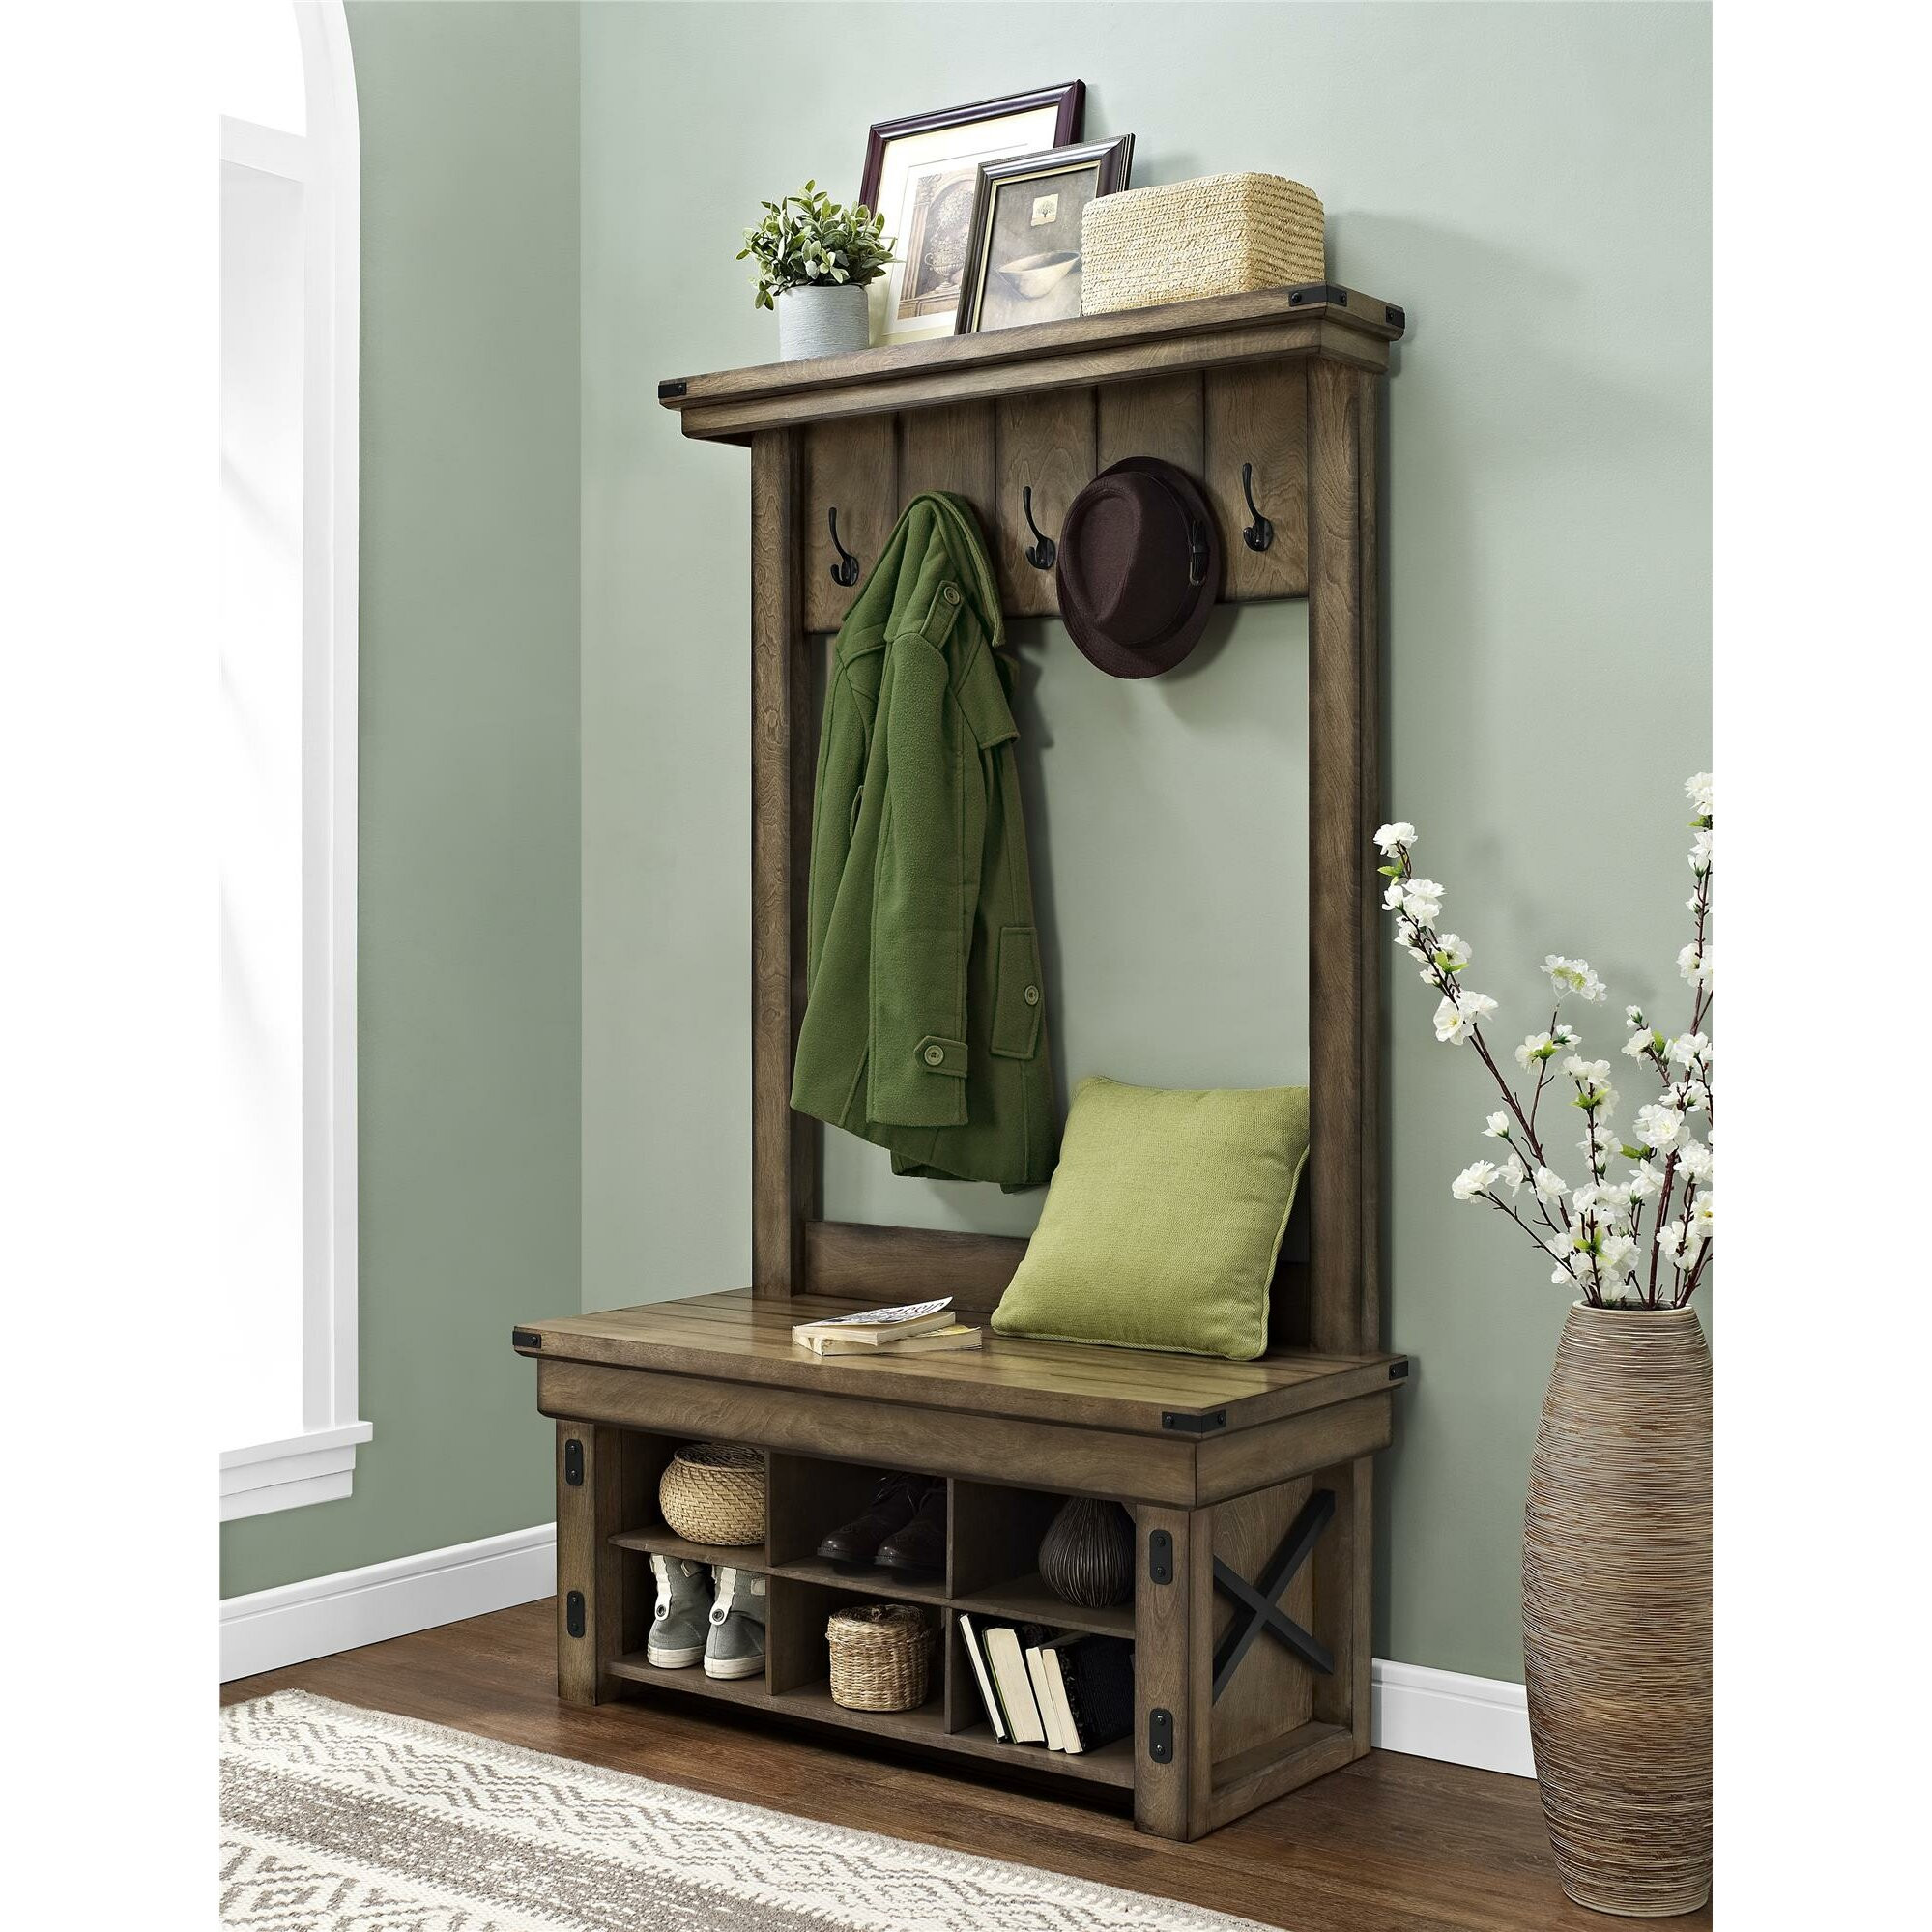 Hall Bench With Storage
 Irwin Wood Veneer Entryway Hall Tree with Storage Bench